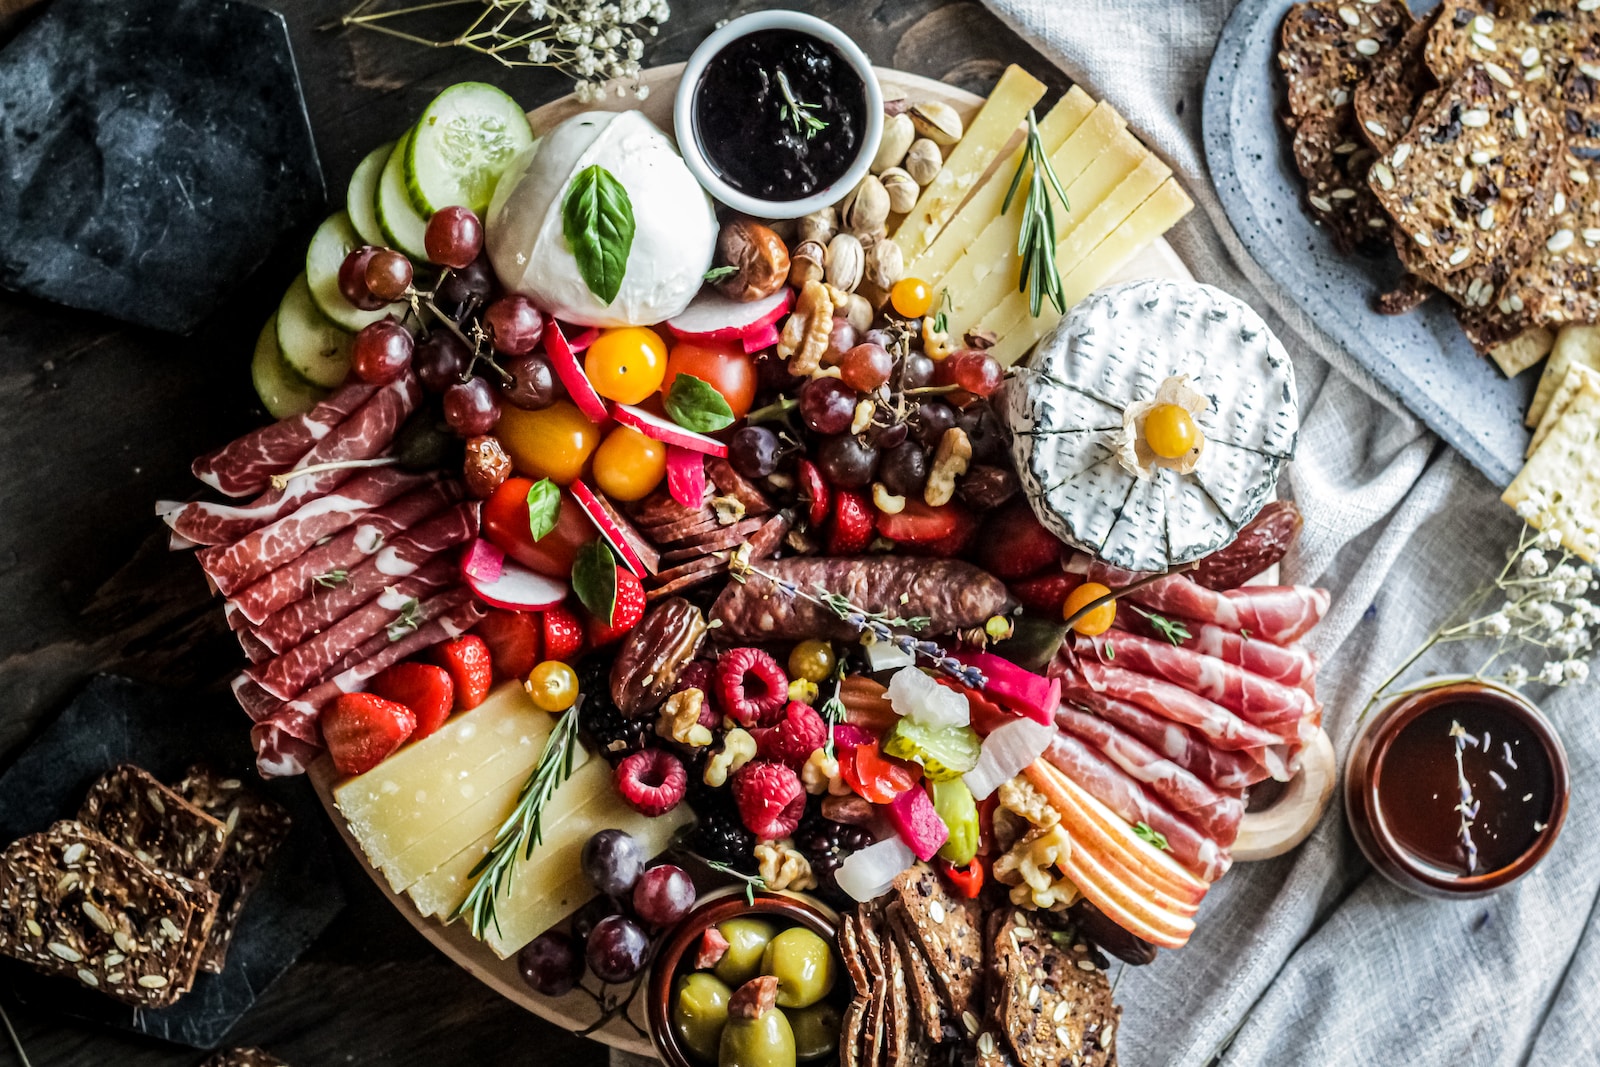 How to Make a Charcuterie Board on a Budget?